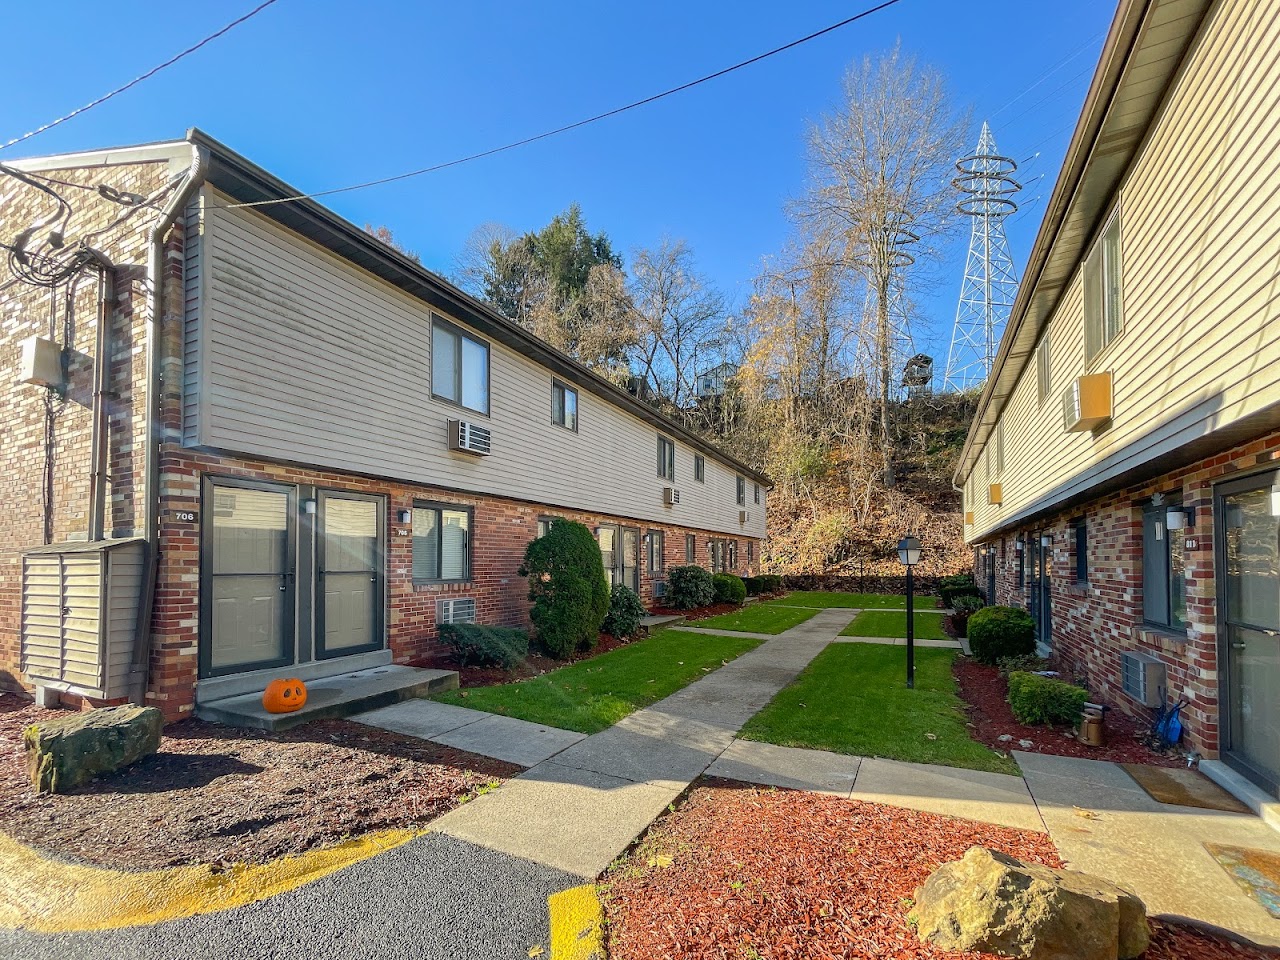 Photo of MEADOWS APTS. Affordable housing located at 201 STATION ST PENN HILLS, PA 15235